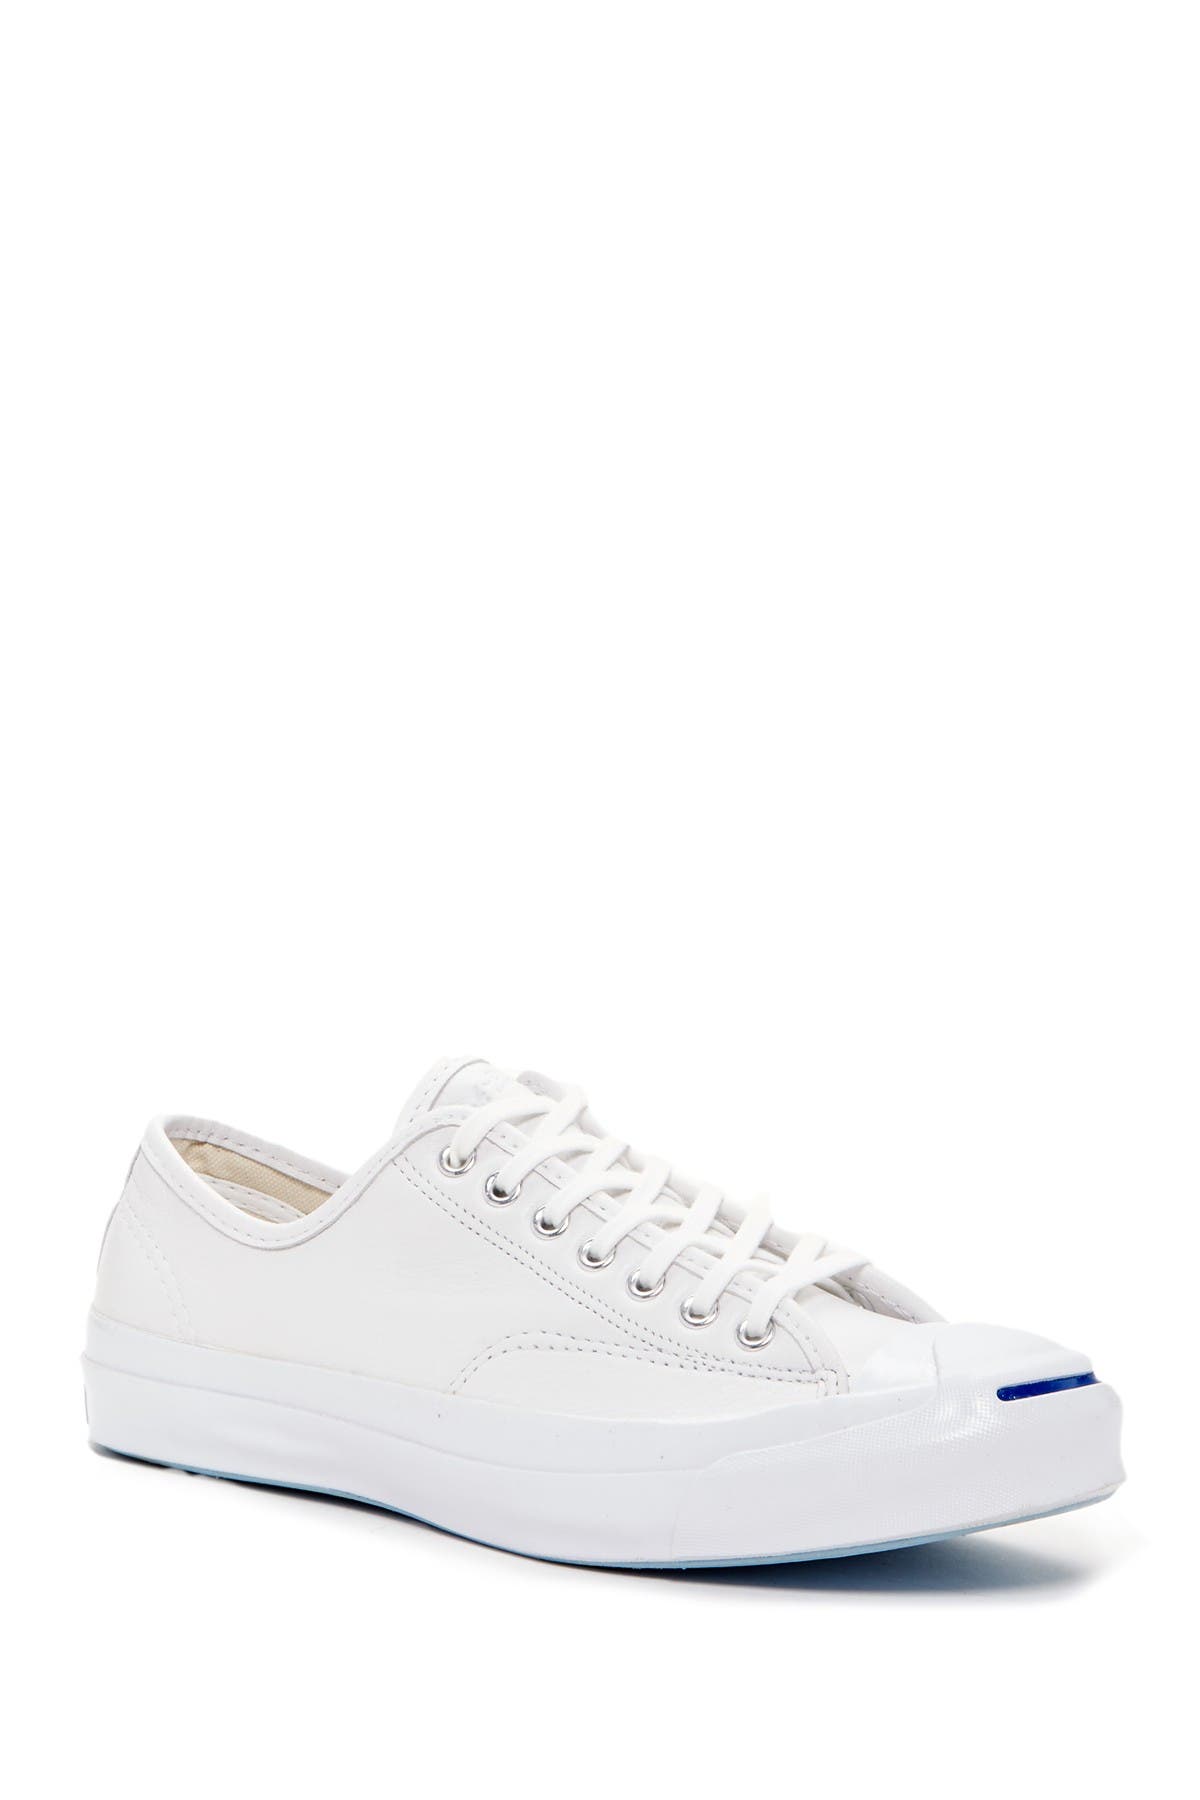 Converse | Jack Purcell Signature 